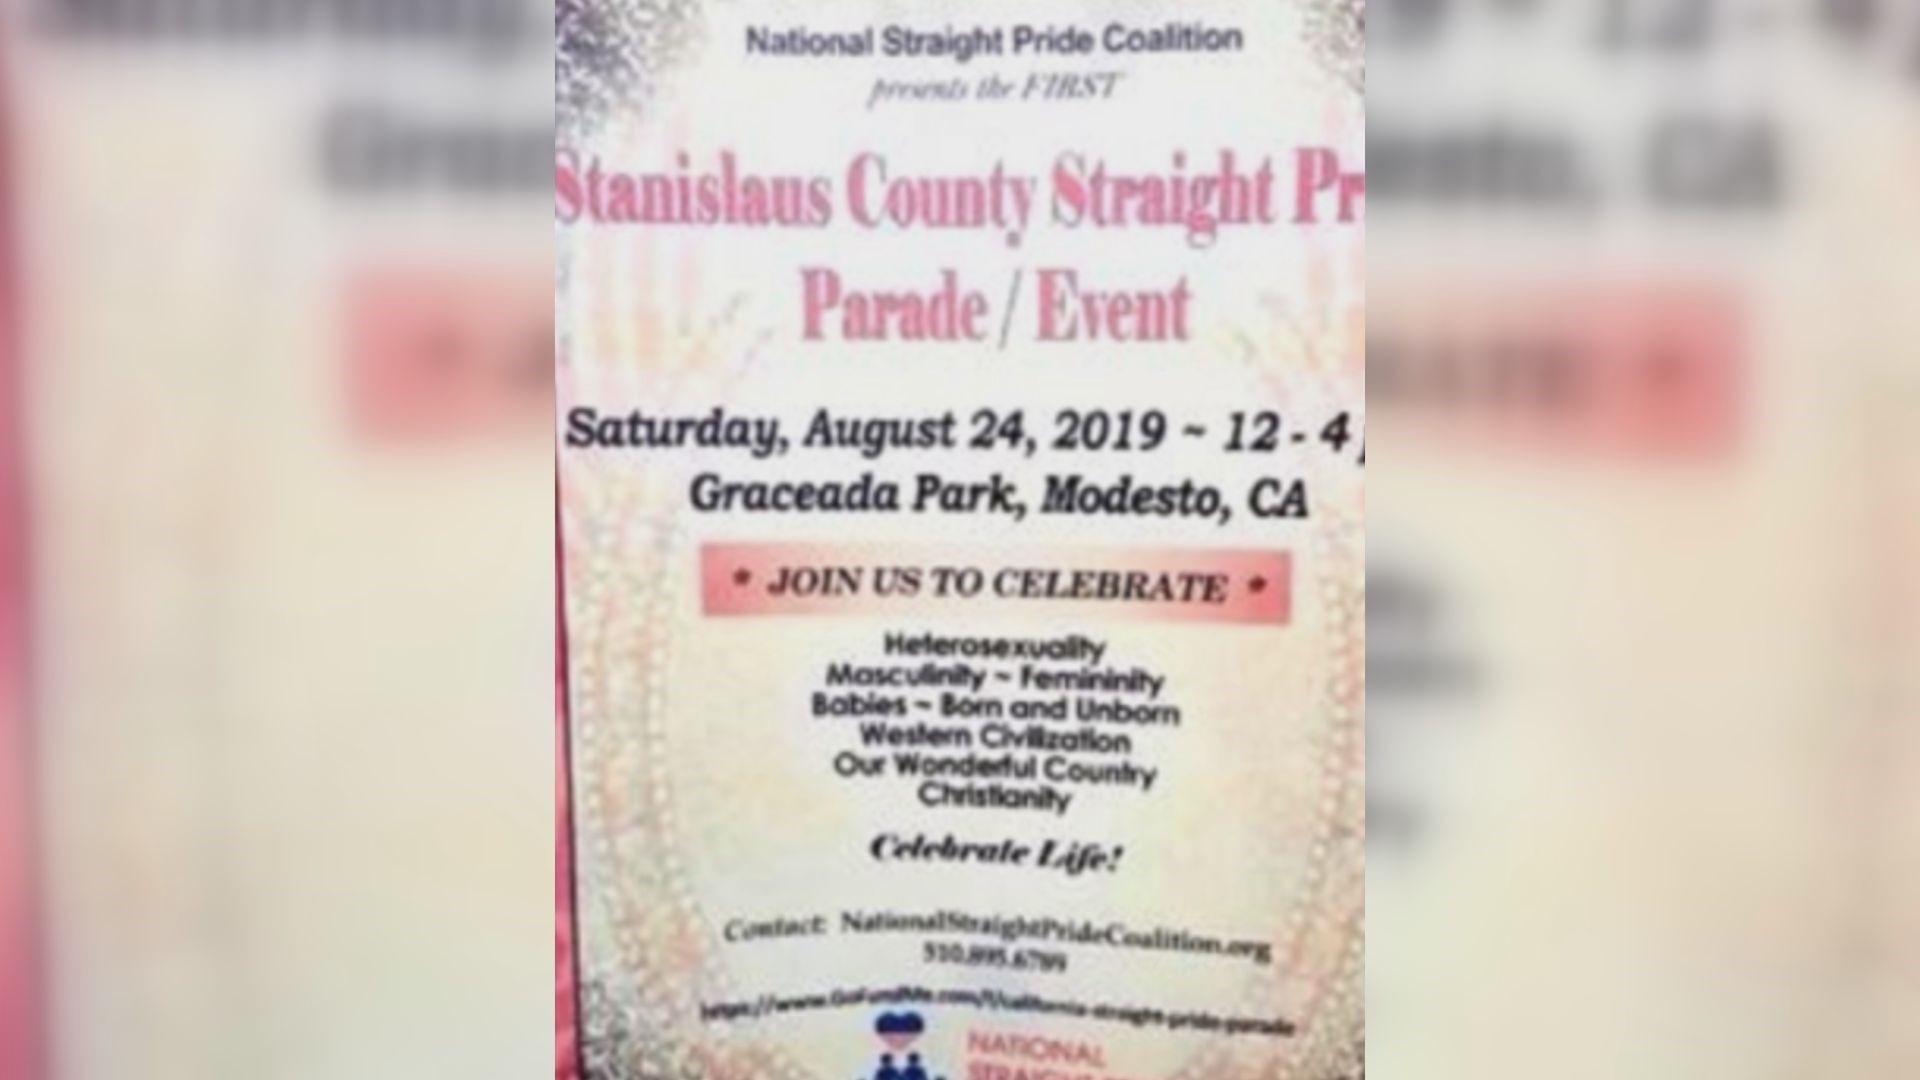 It's advertised on a flier as a celebration of "Heterosexuality, Masculinity, Femininity" and more. The National Straight Pride Coalition has submitted a permit billed as a "picnic" and "cultural celebration" scheduled for August 24.